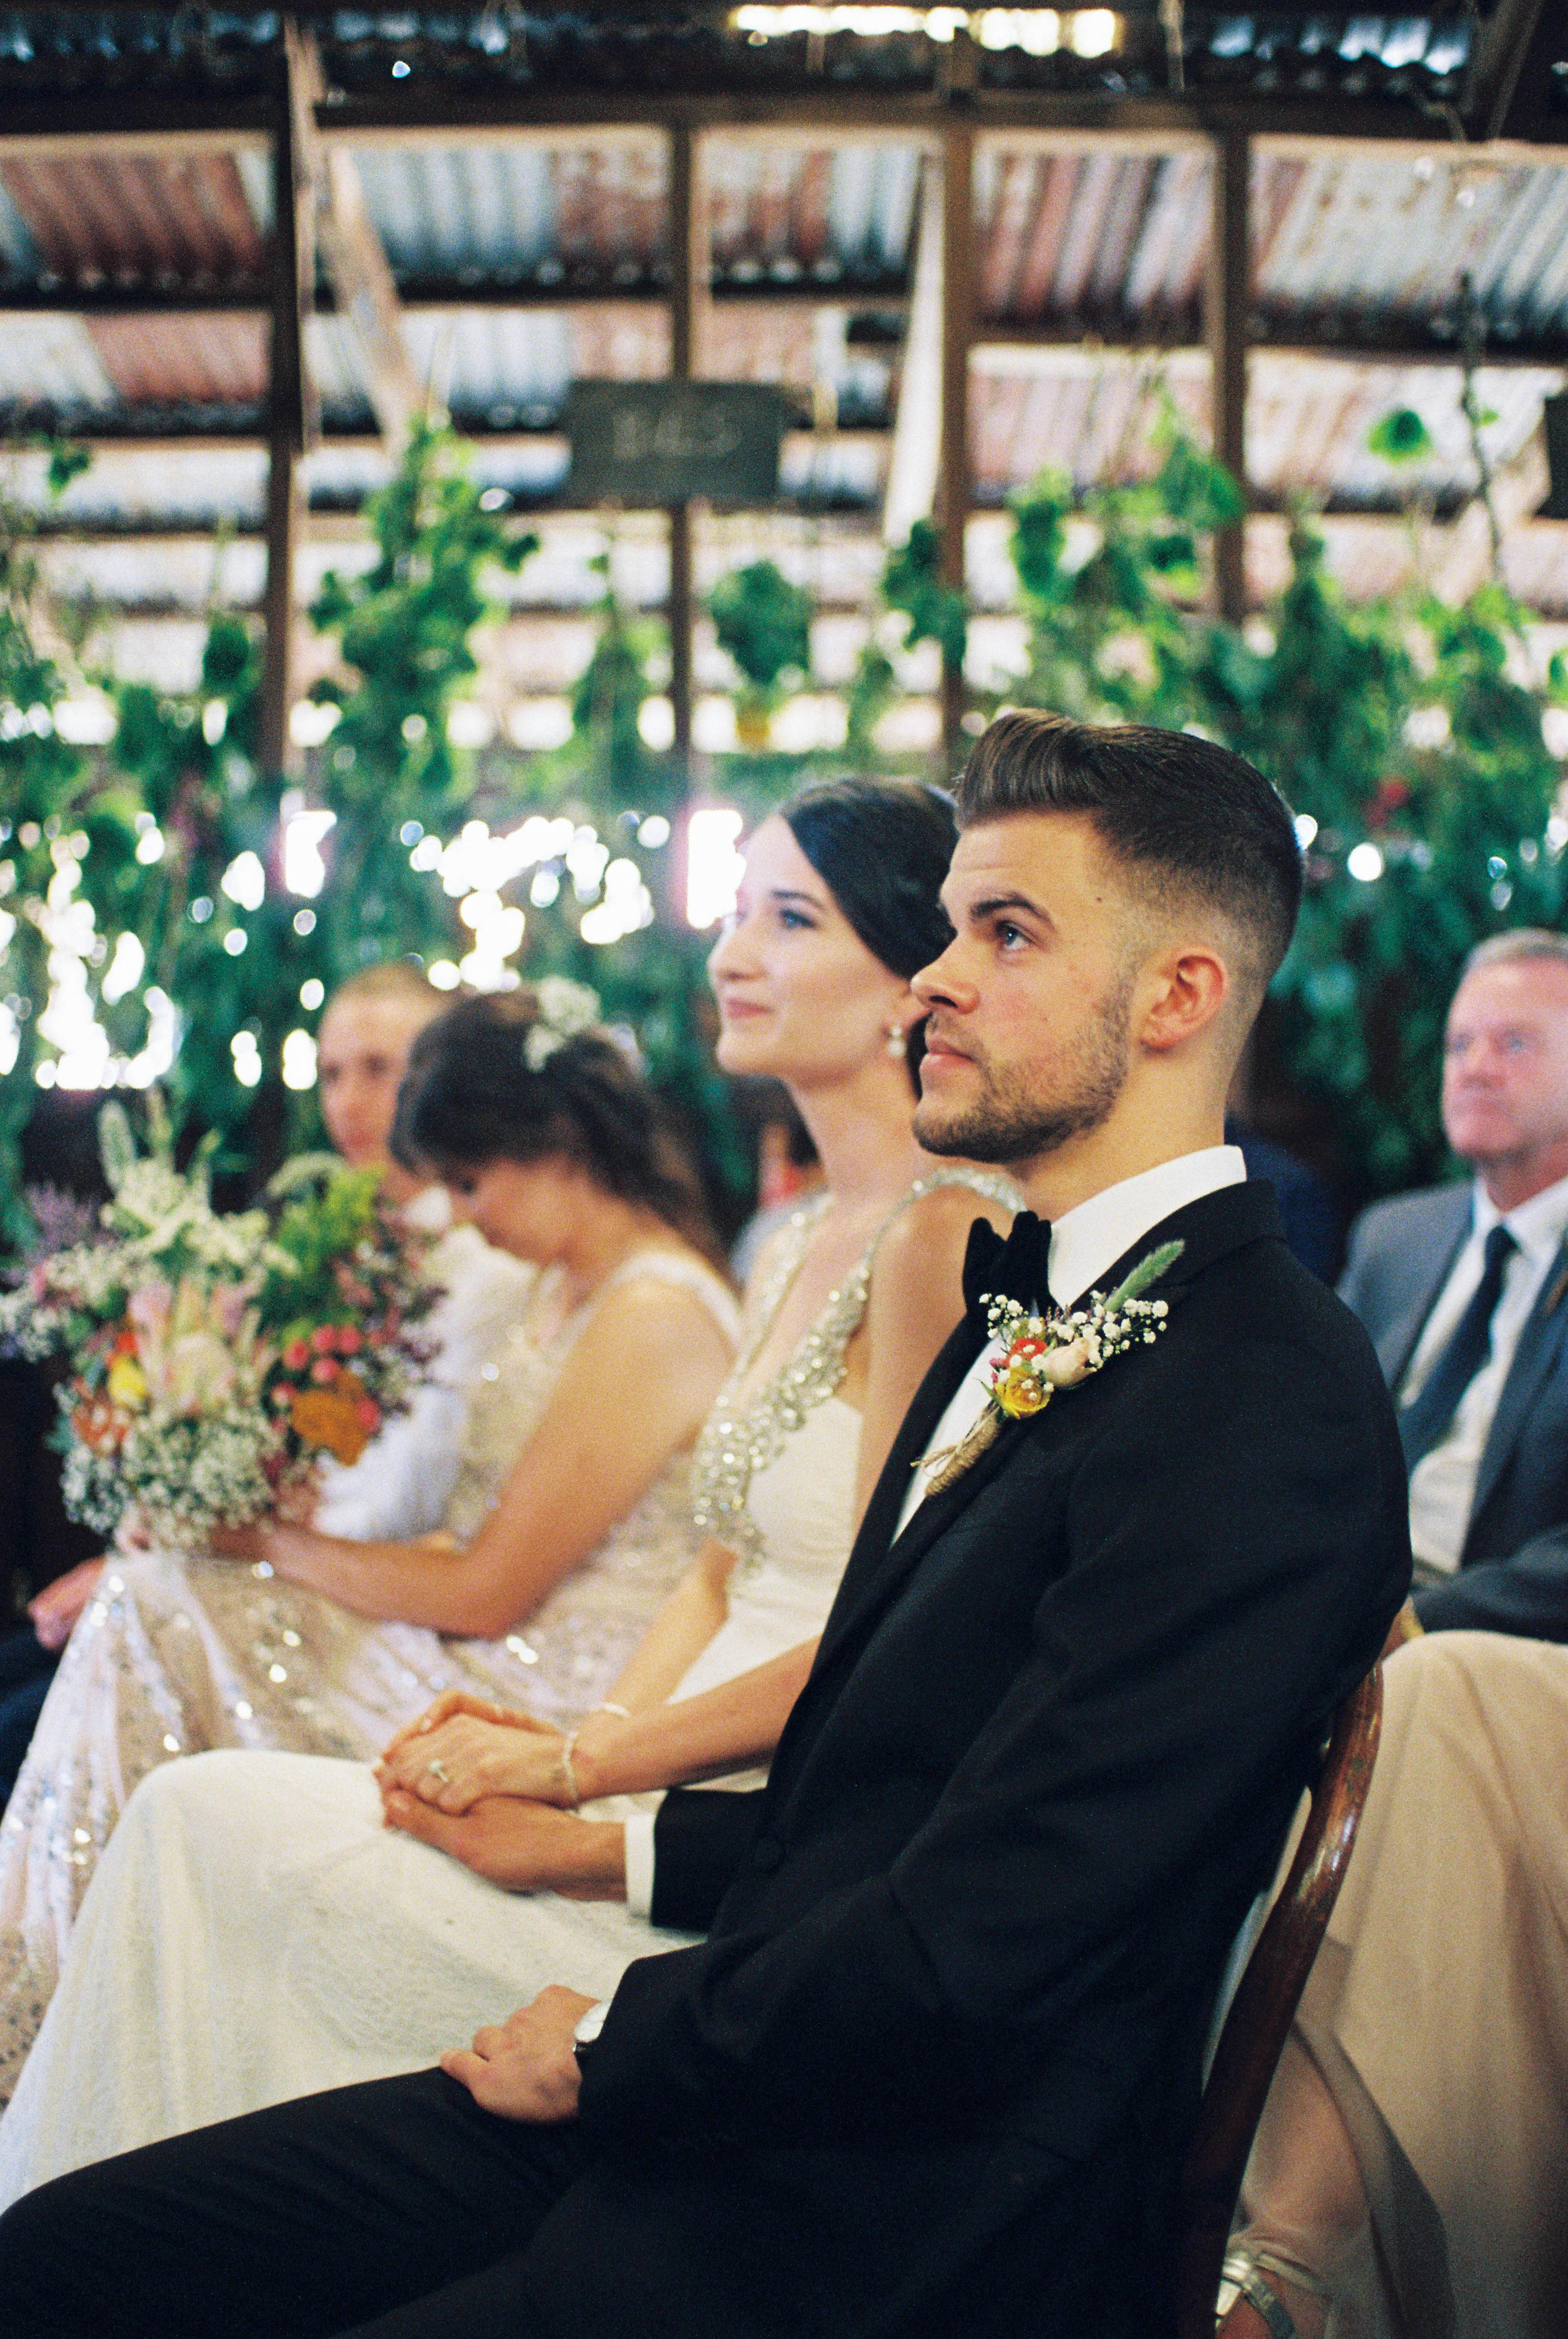 The bride and groom look towards the altar during their south west country wedding ceremony